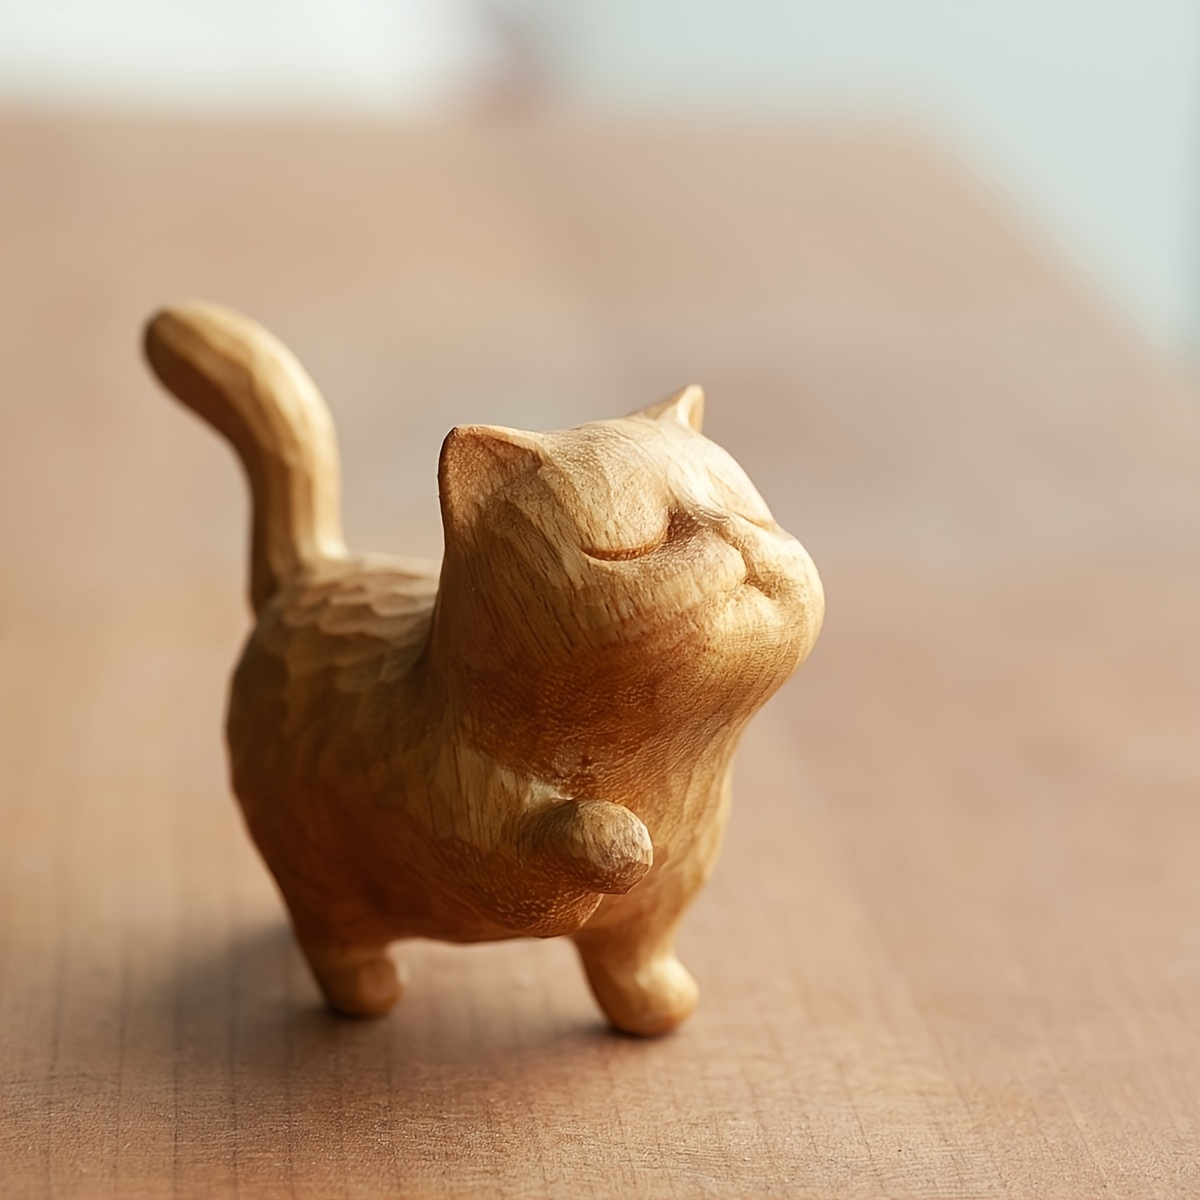 

Handcrafted Wooden Cat Figurine - Charming Sculpture For Home Decor, Perfect Gift For Christmas, New Year & Easter